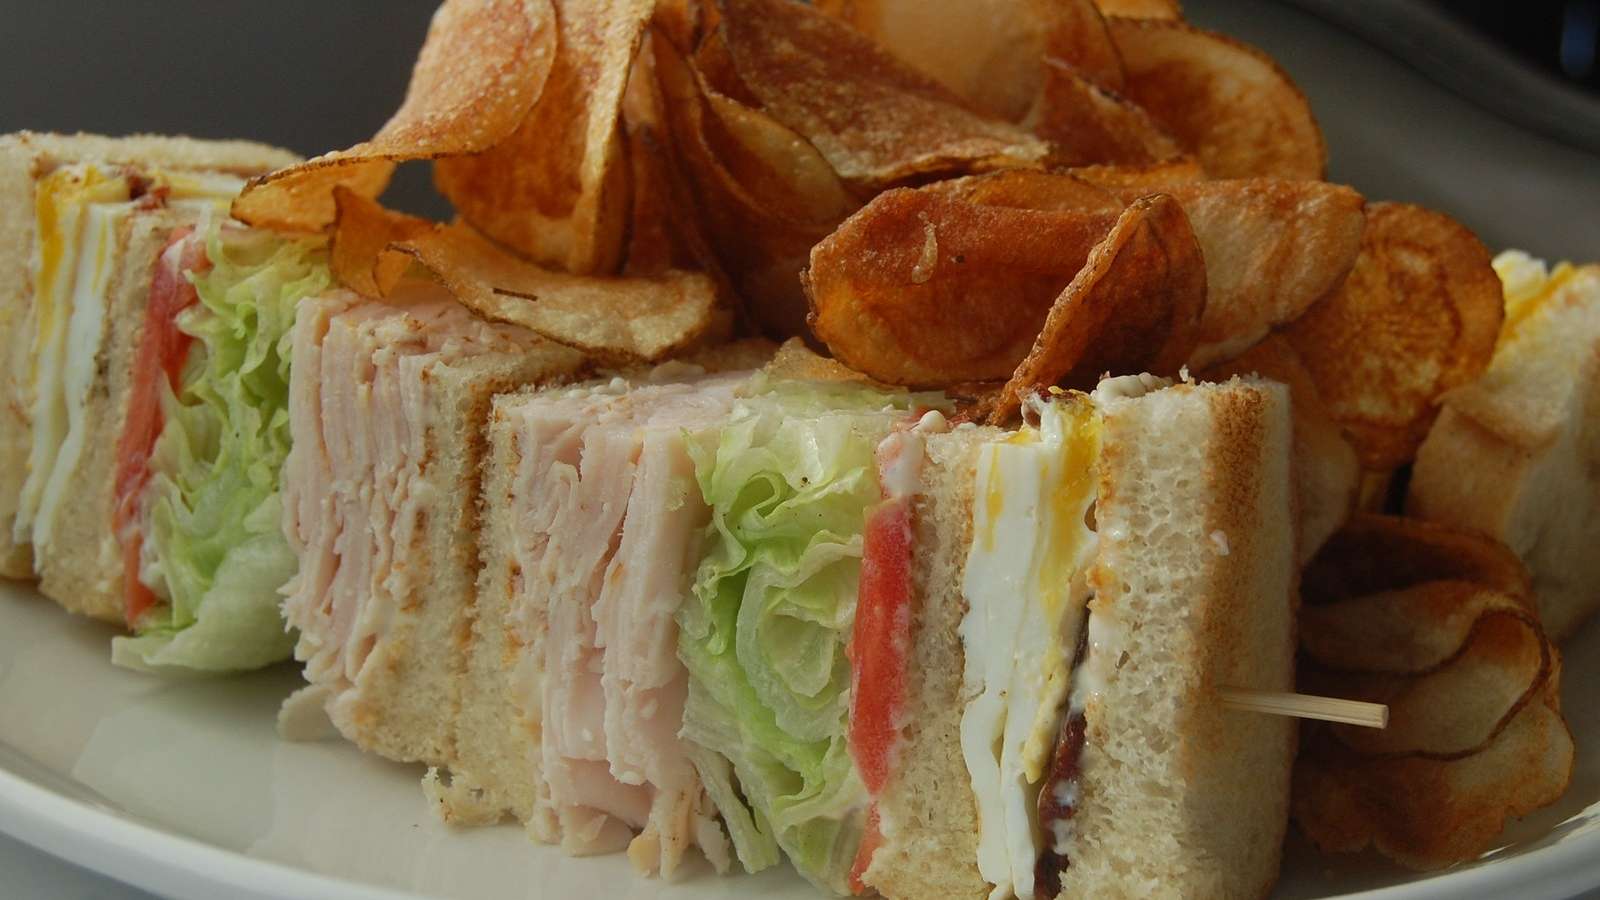 Image shows sandwiches on plate